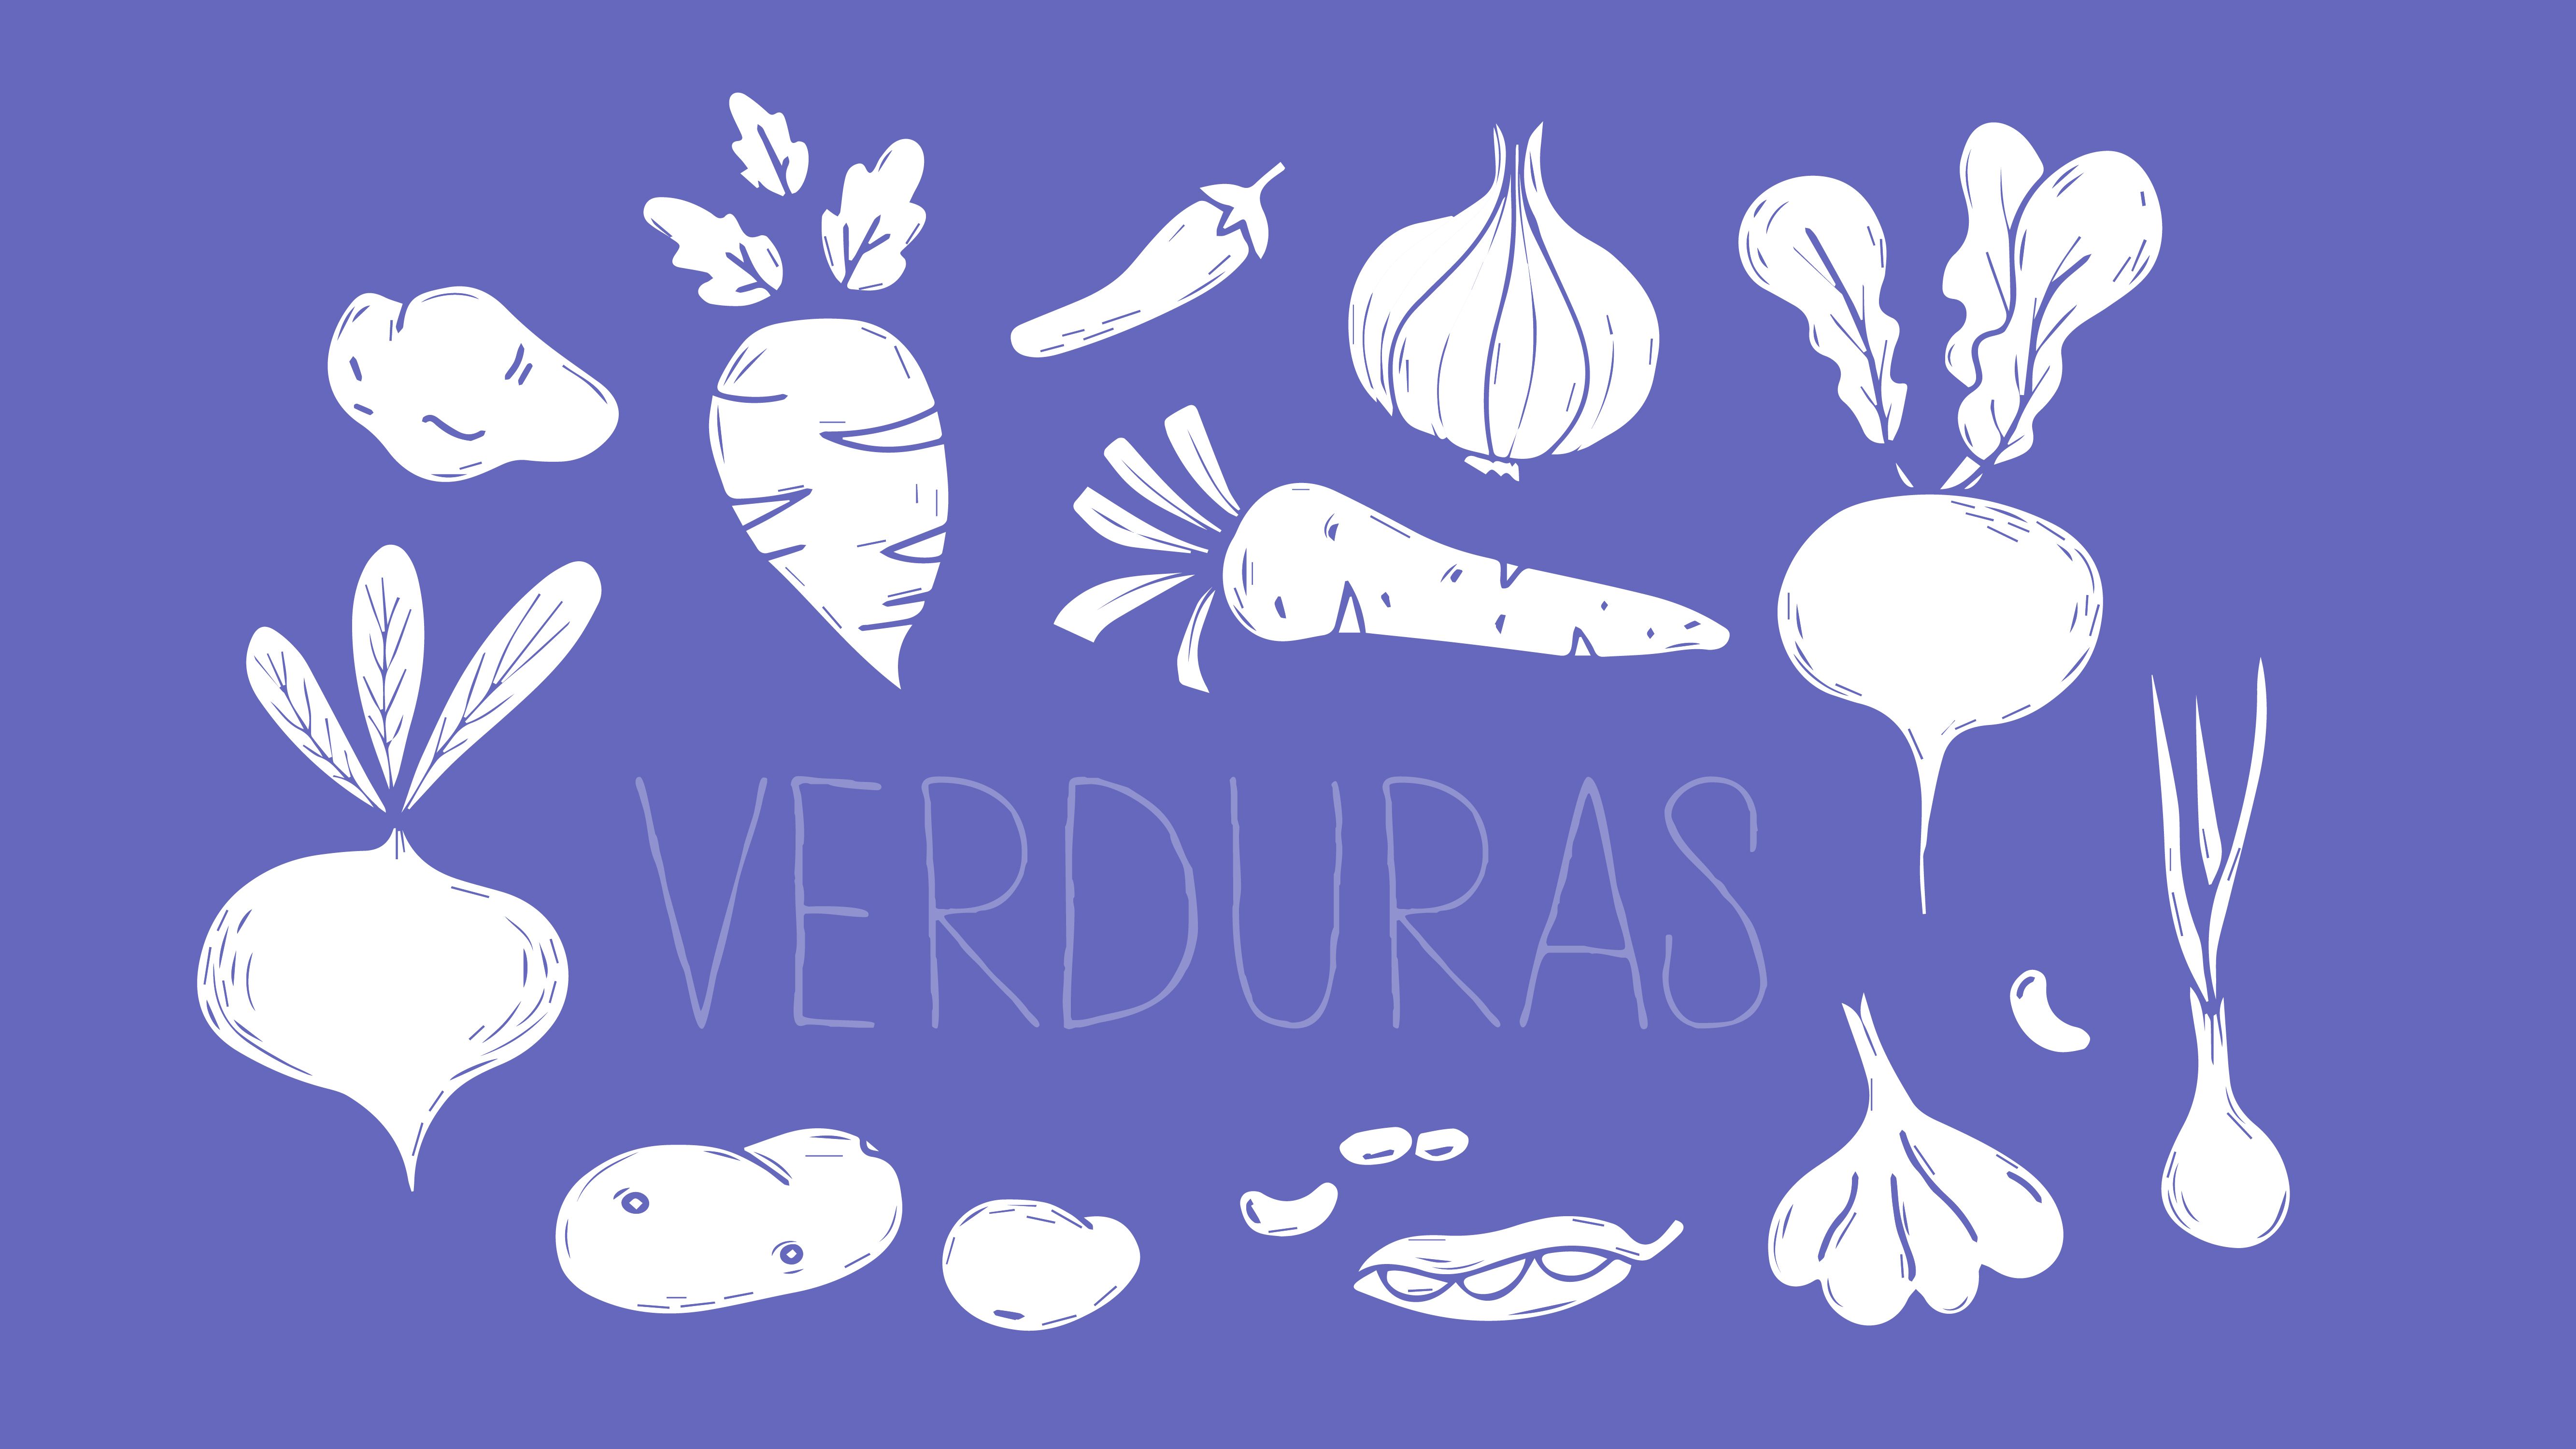 A picture of a bunch of vegetables, such as onions, carrots, turnips, and garlic.